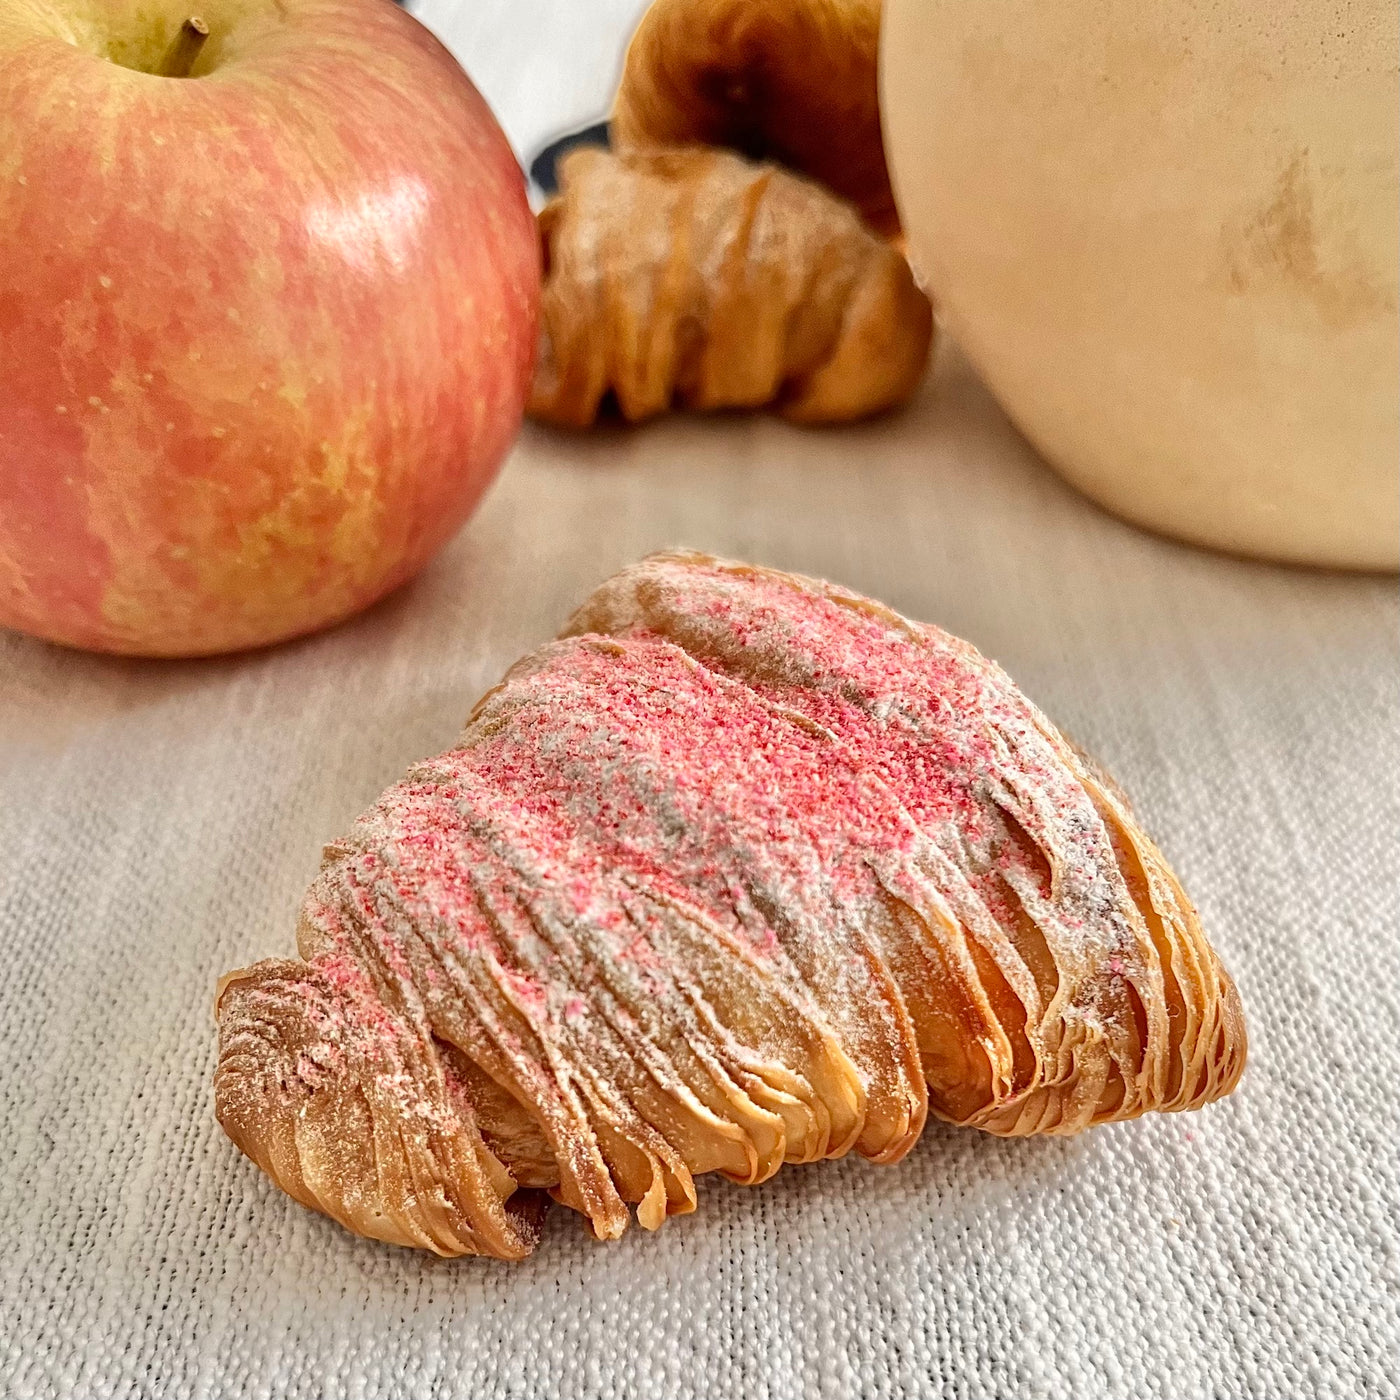 Lobster Tail Pastry- Fujisaki Type Apples with Cinnamon